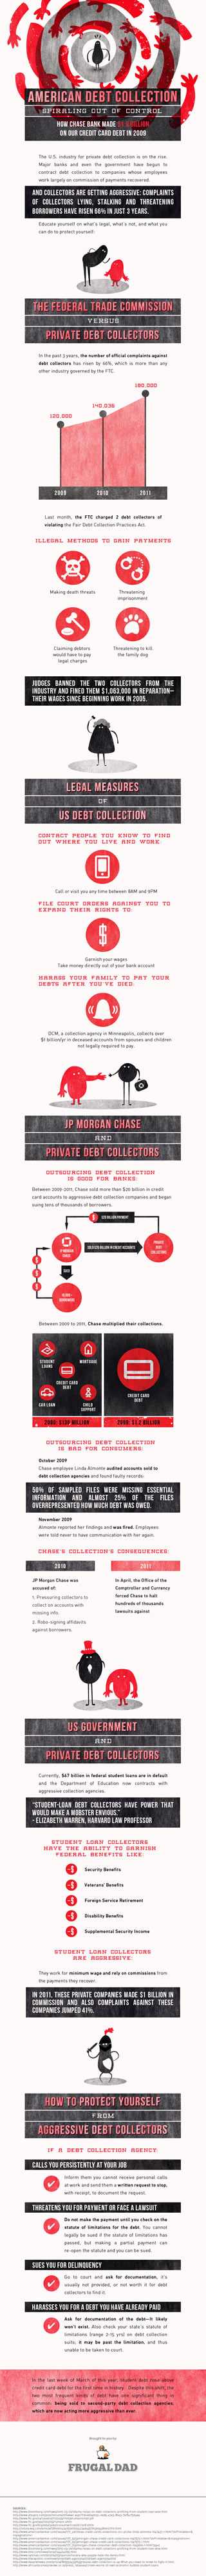 american debt collection infographic